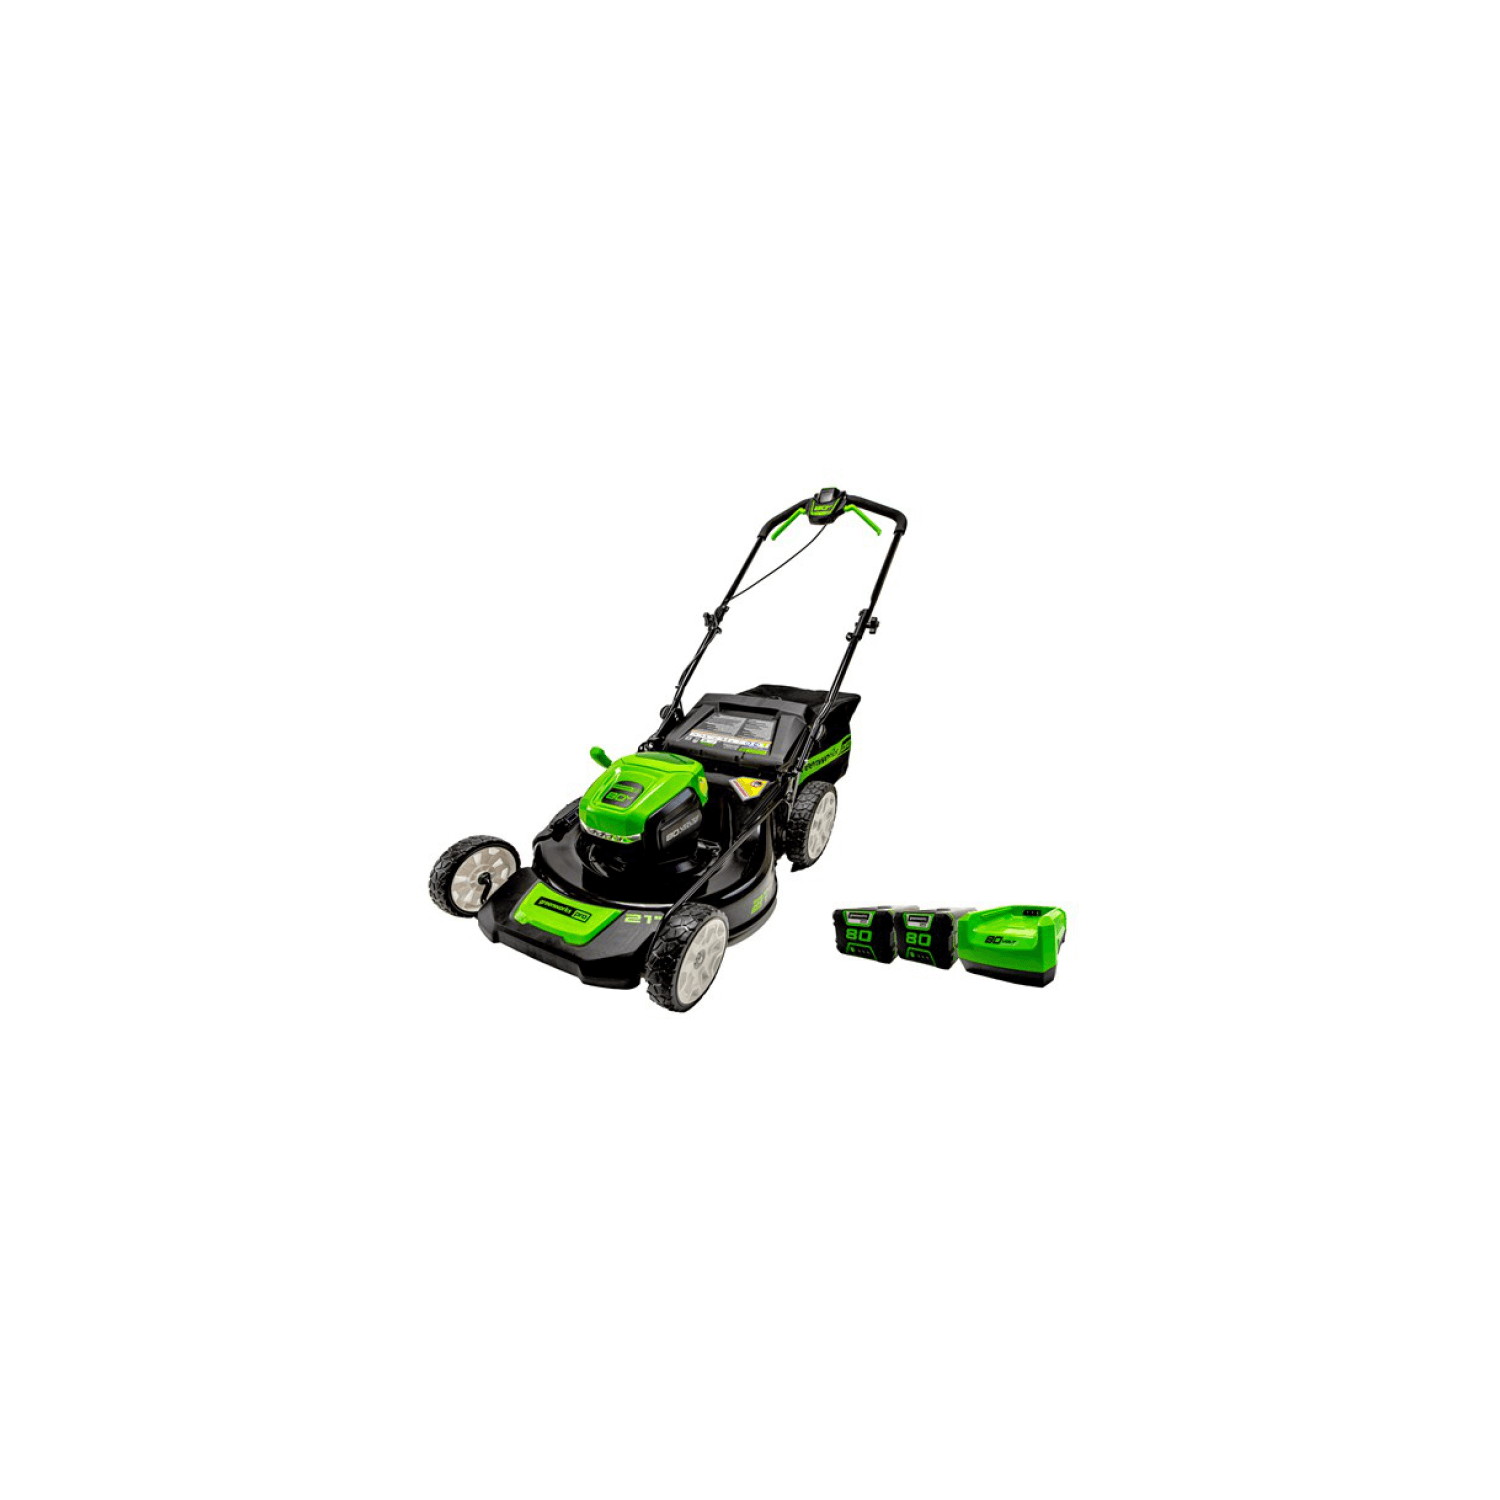 Greenworks 80V 21" Brushless Cordless Push Lawn Mower, (2)2.0 Ah Batteries and Charger Included [75+ Compatible Tools]